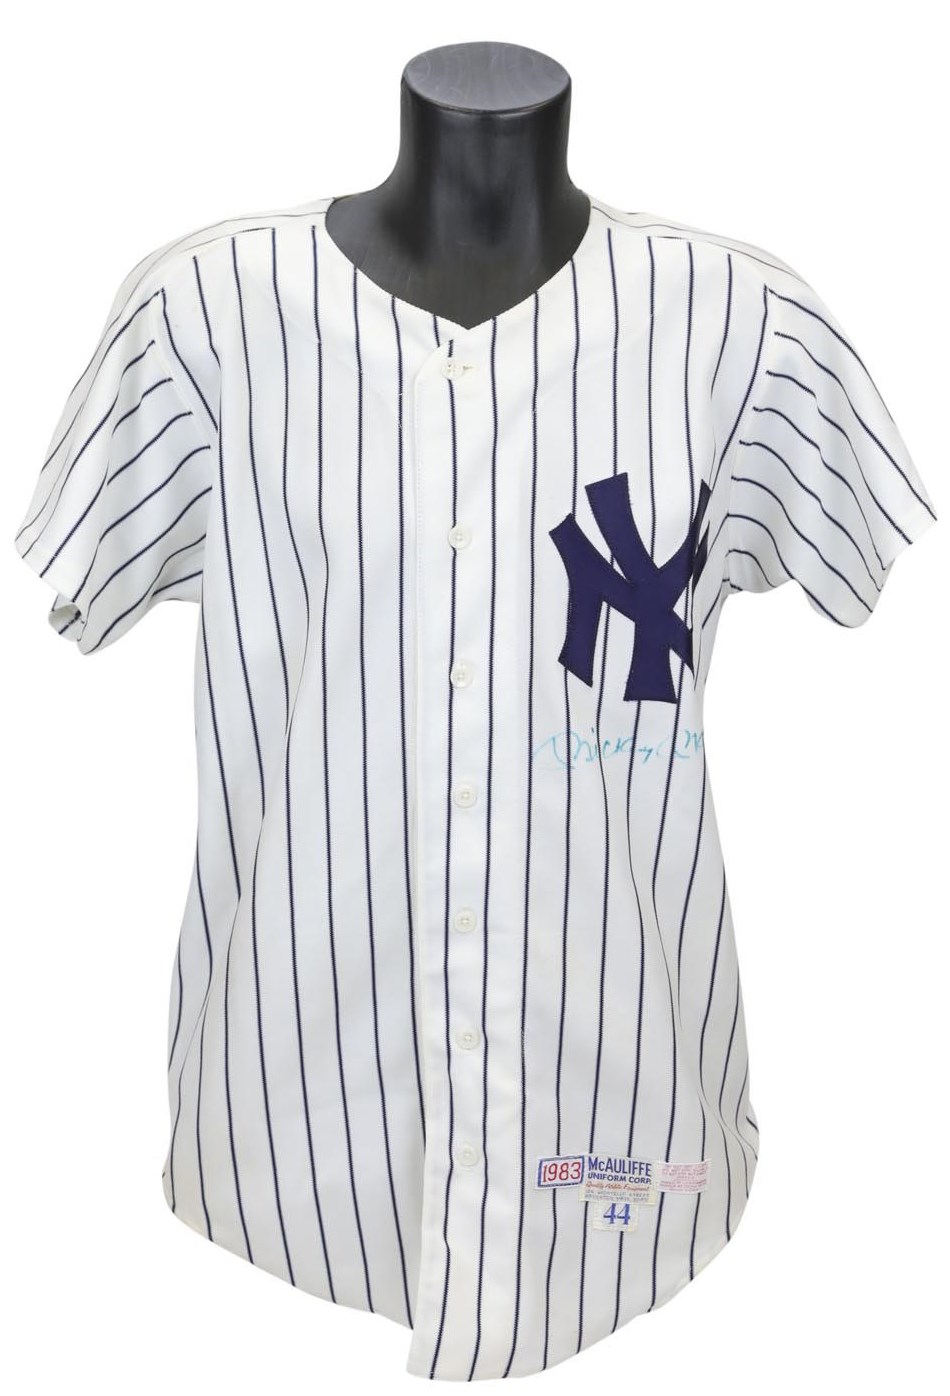 - 1983 Mickey Mantle Signed Yankees Jersey (PSA)